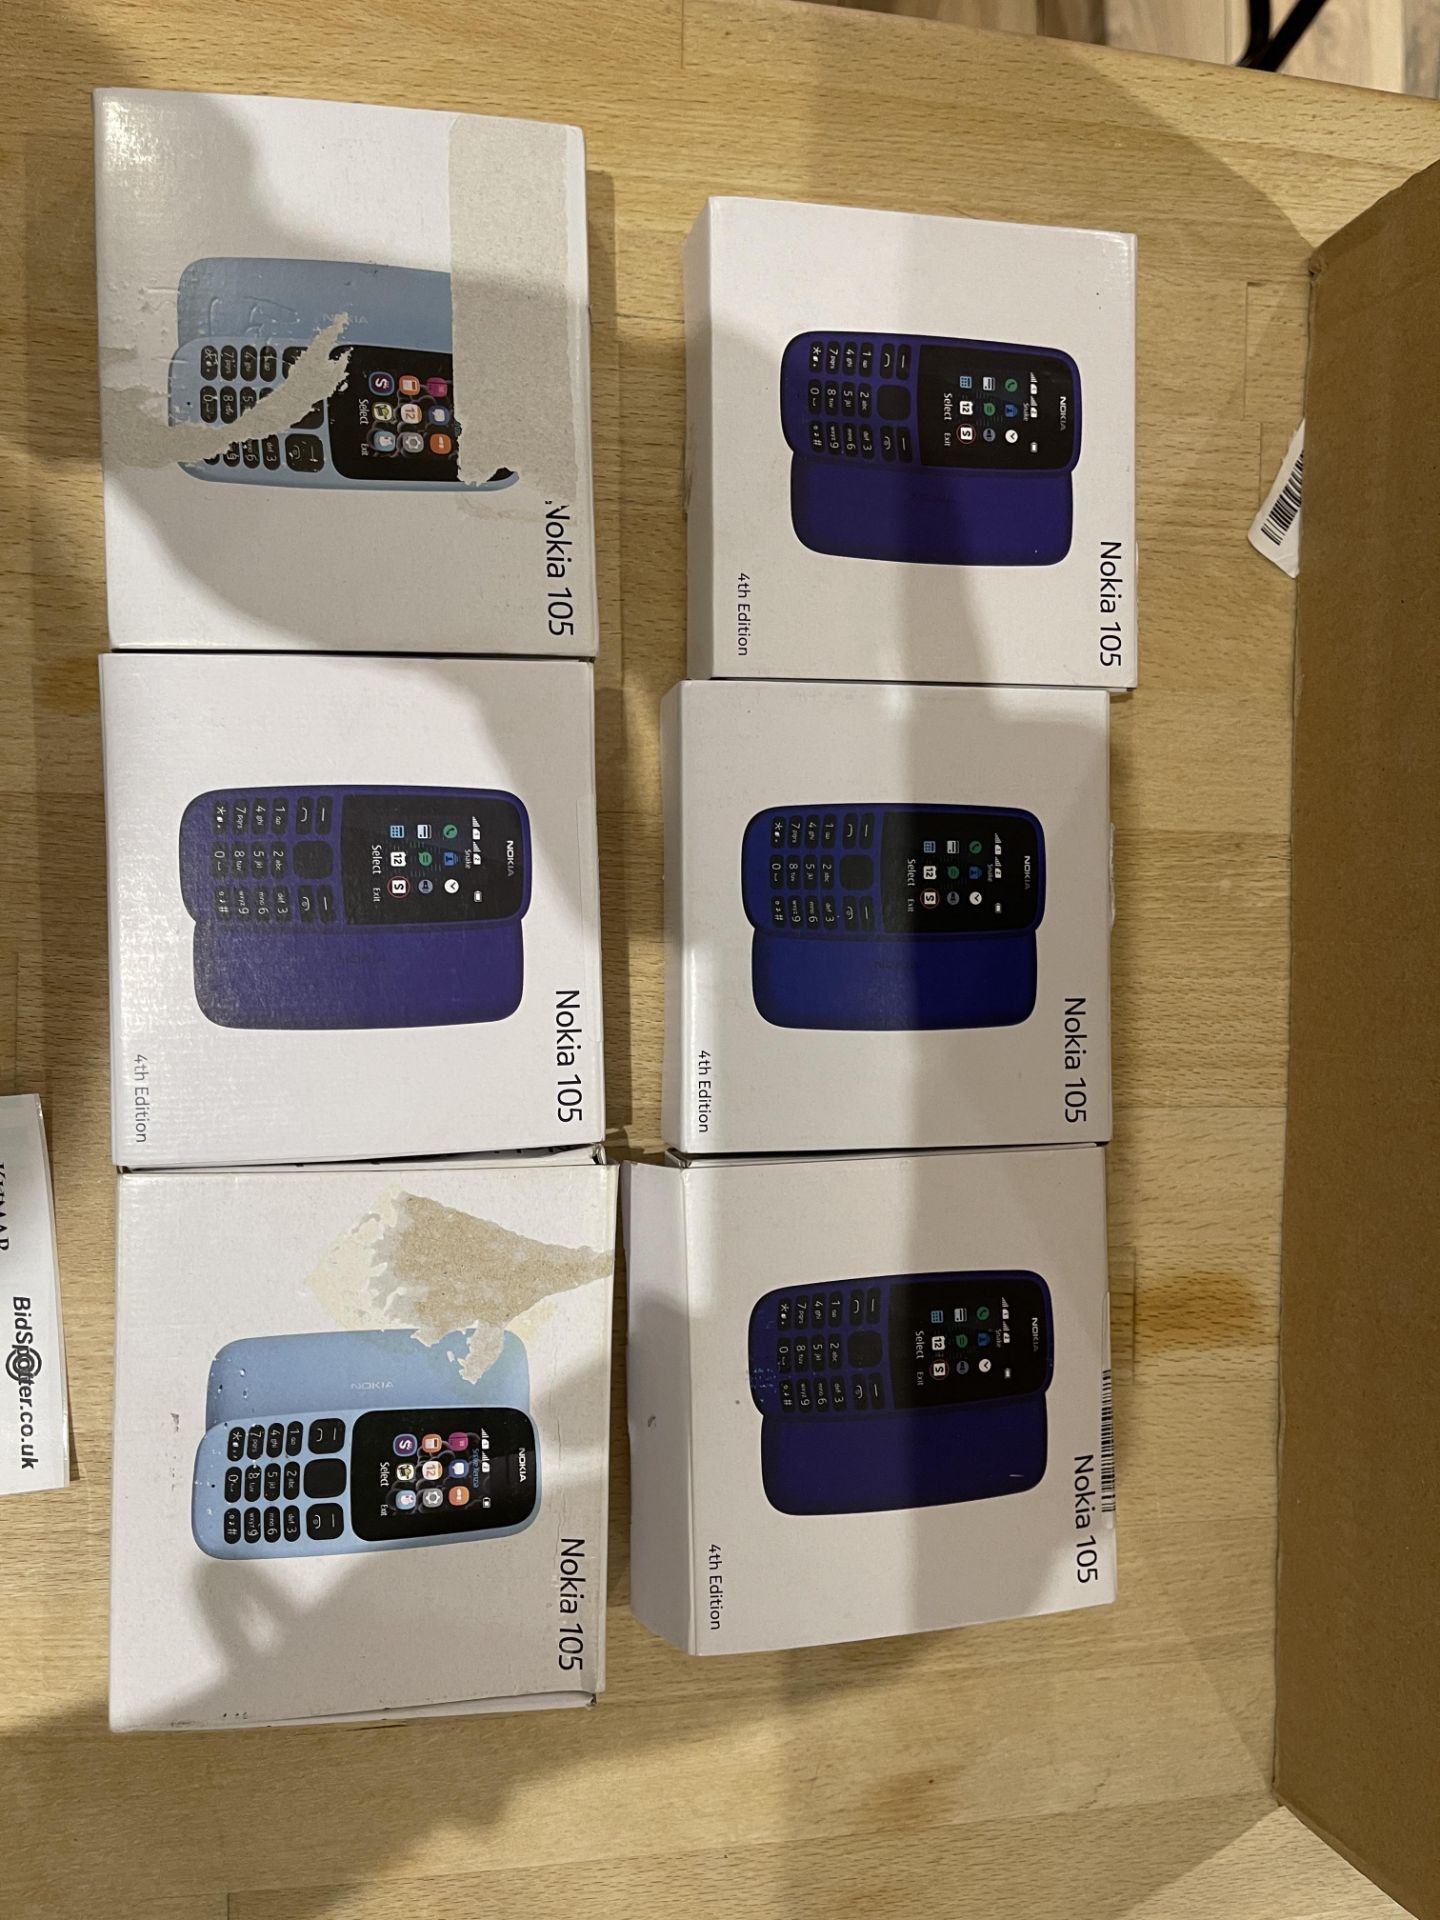 6: Nokia 105 Dual Sim Mobile Phones, Boxes Have Been Opened, Phone, Battery & Charger All Present - - Image 2 of 15